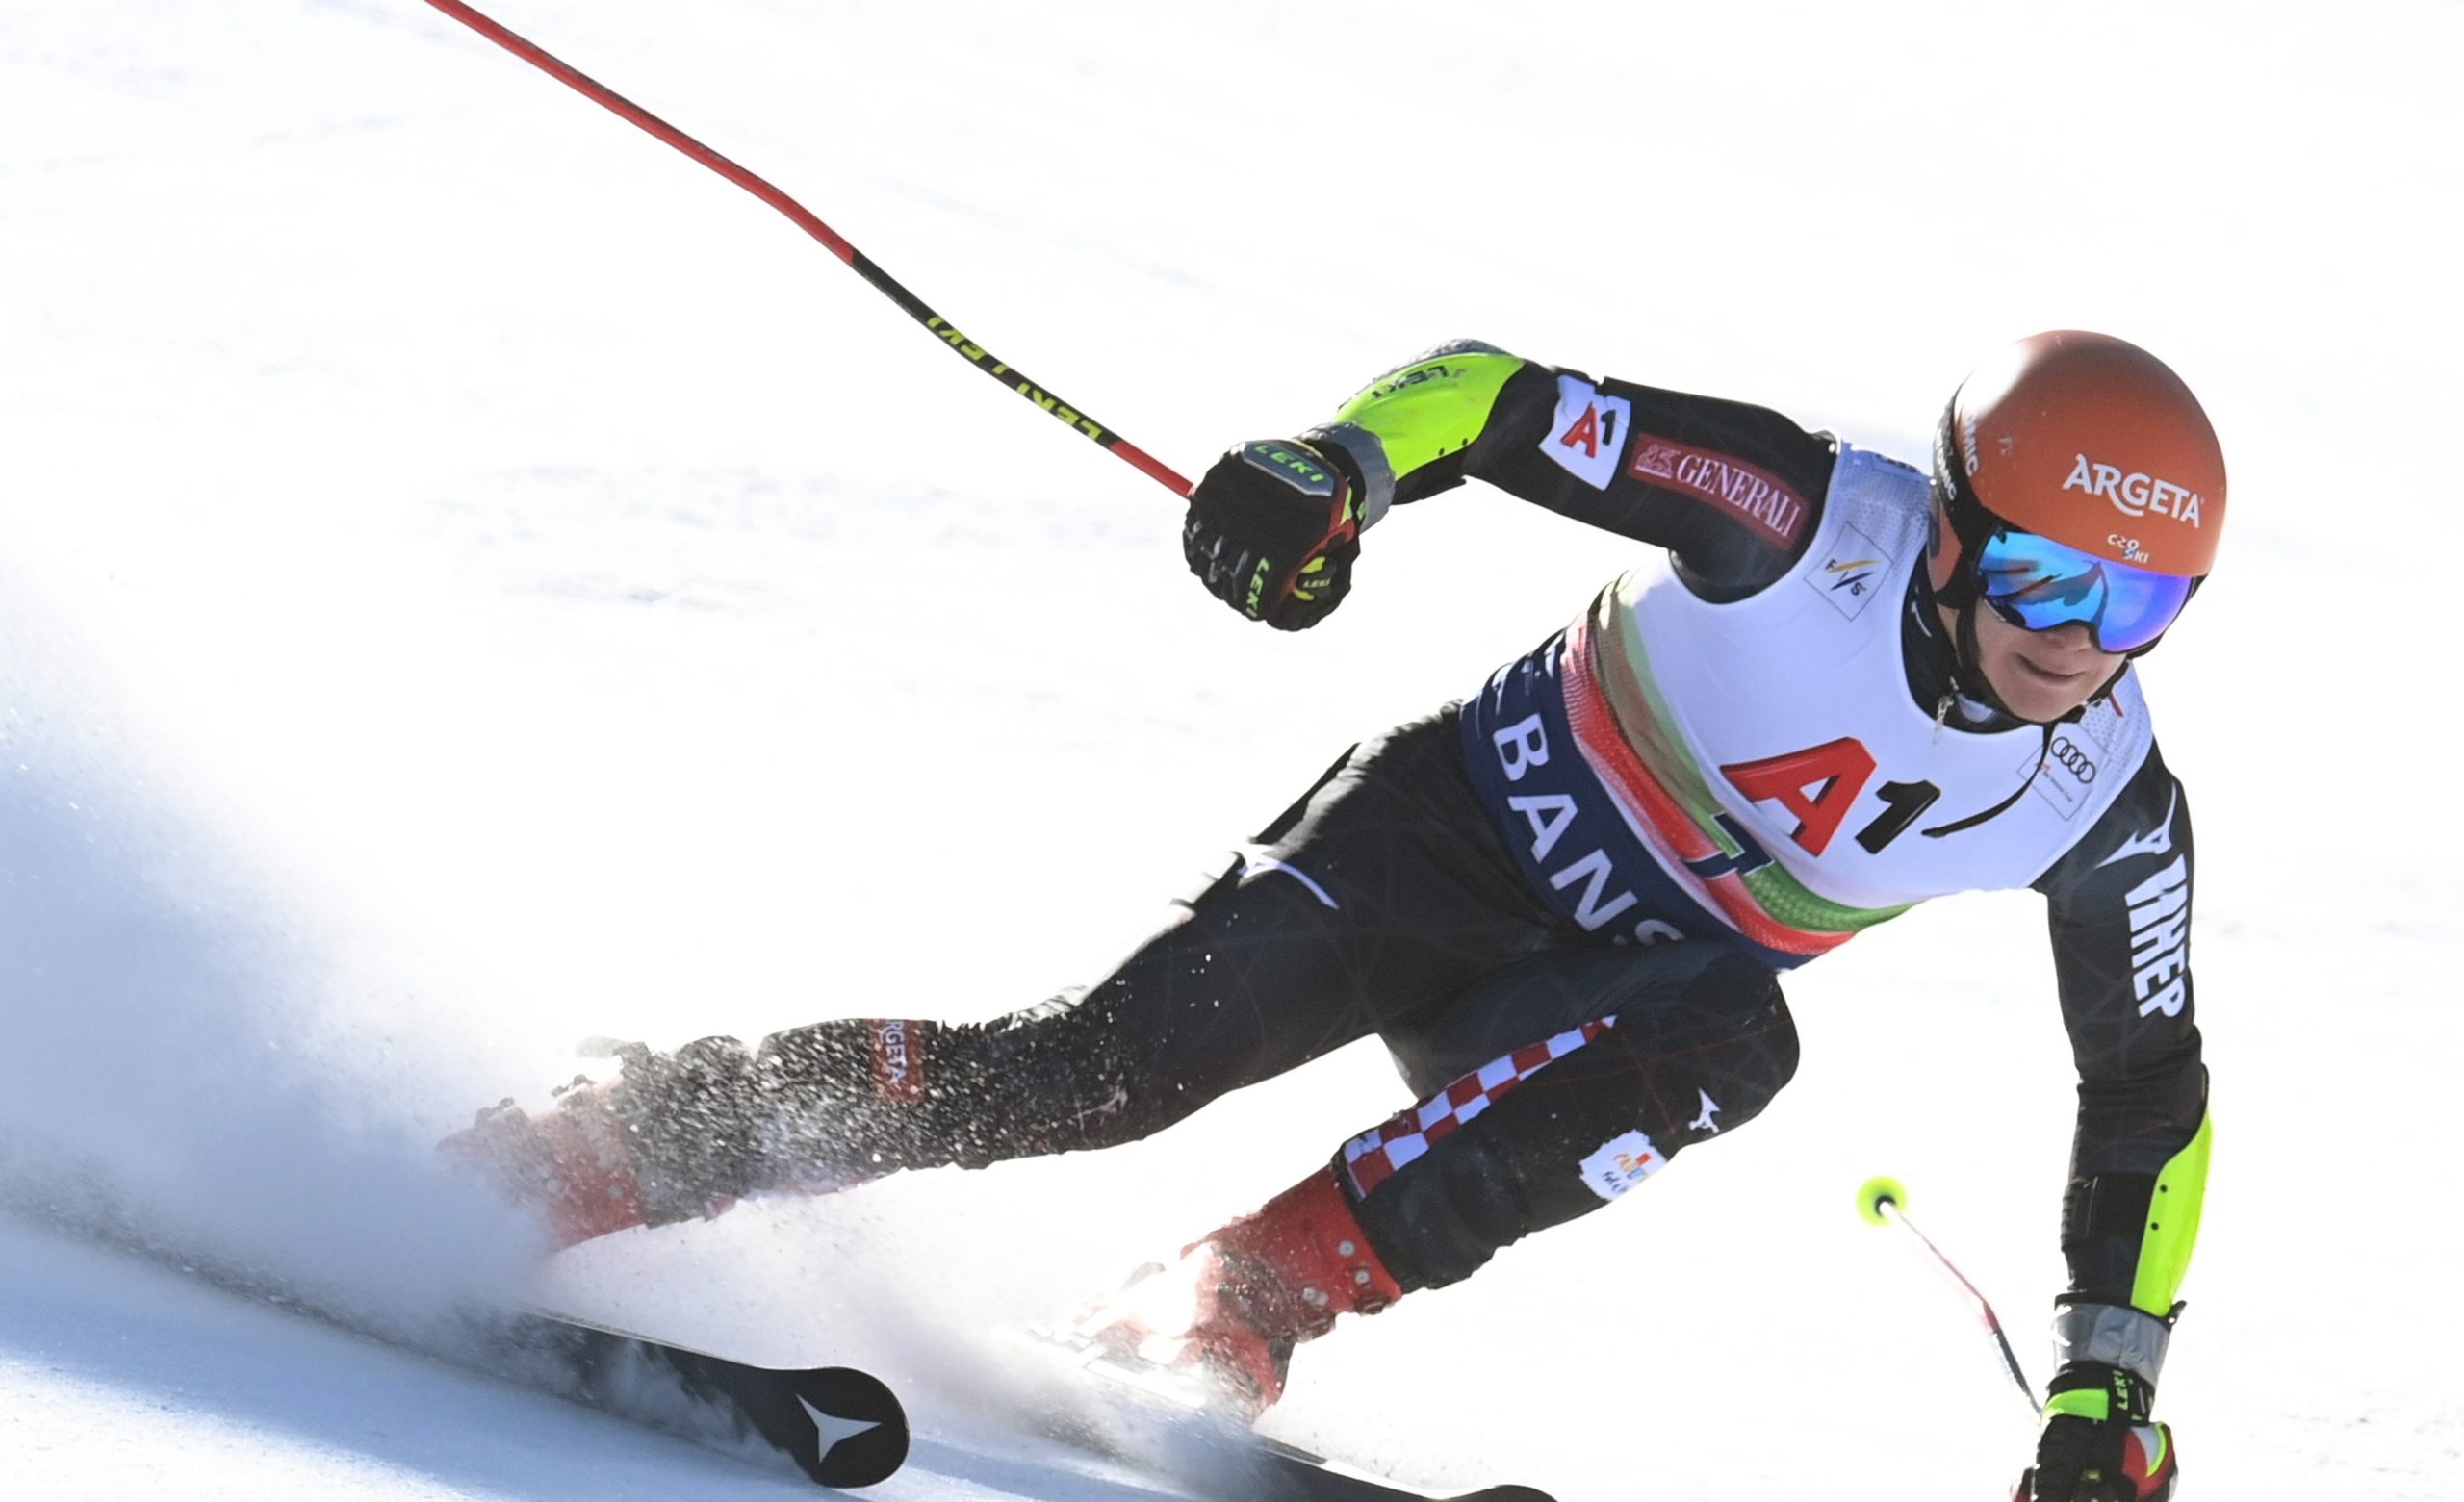 epa09039554 Filip Zubcic of Croatia in action during the Men's Giant Slalom 1st run at the FIS Alpine Skiing World Cup in Bansko, Bulgaria, 27 February 2021.  EPA/VASSIL DONEV